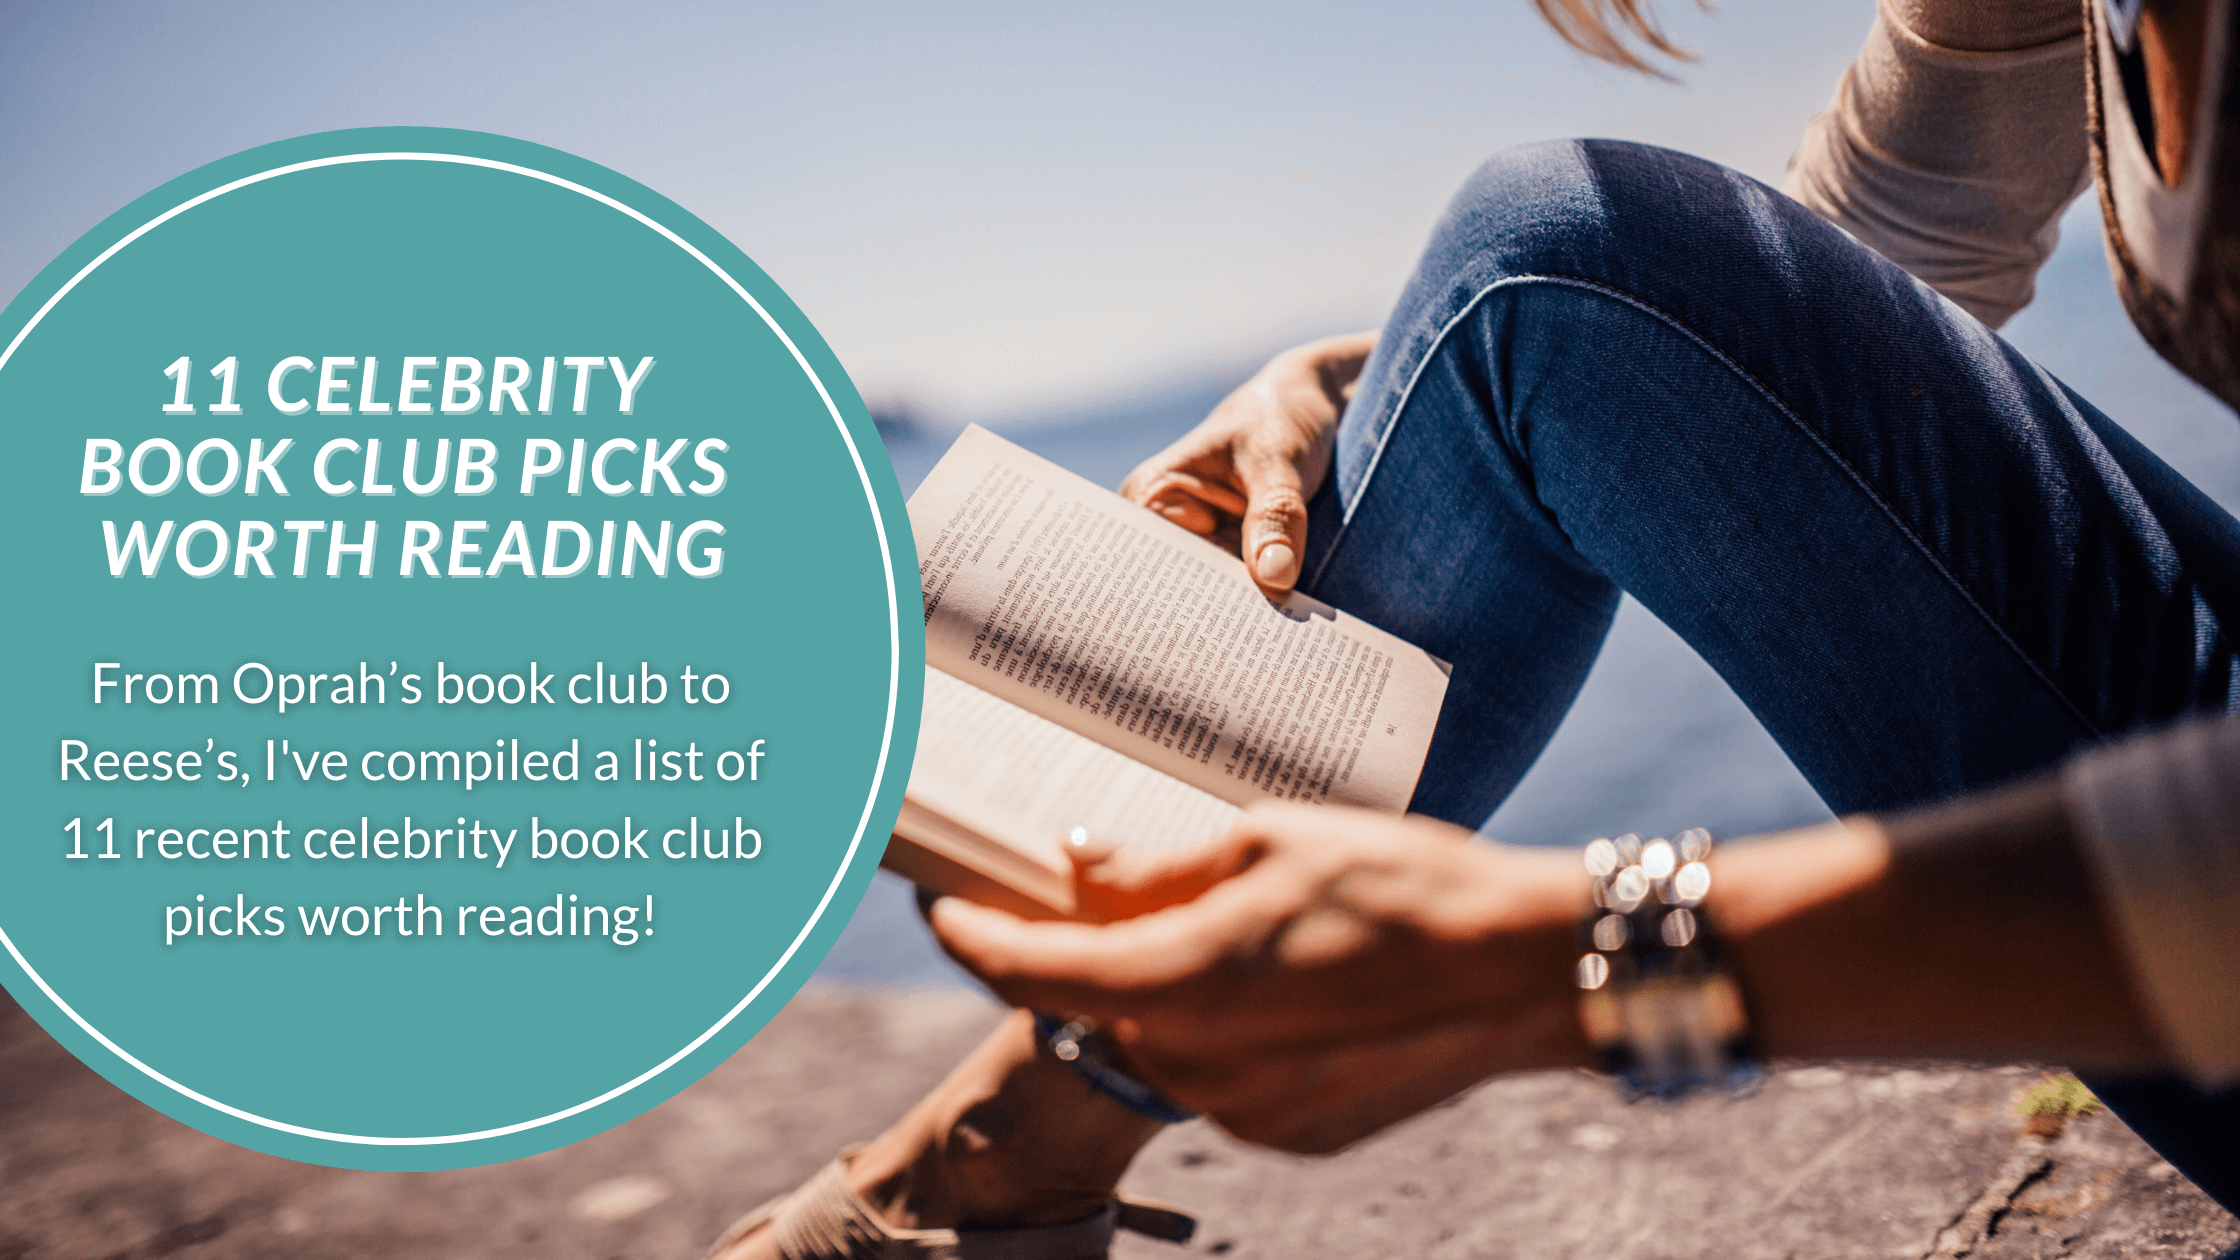 From Oprah’s book club to Reese’s, I've compiled a list of 11 recent celebrity book club picks worth reading! Stylish woman reading a celebrity book club pick on a rock by water.